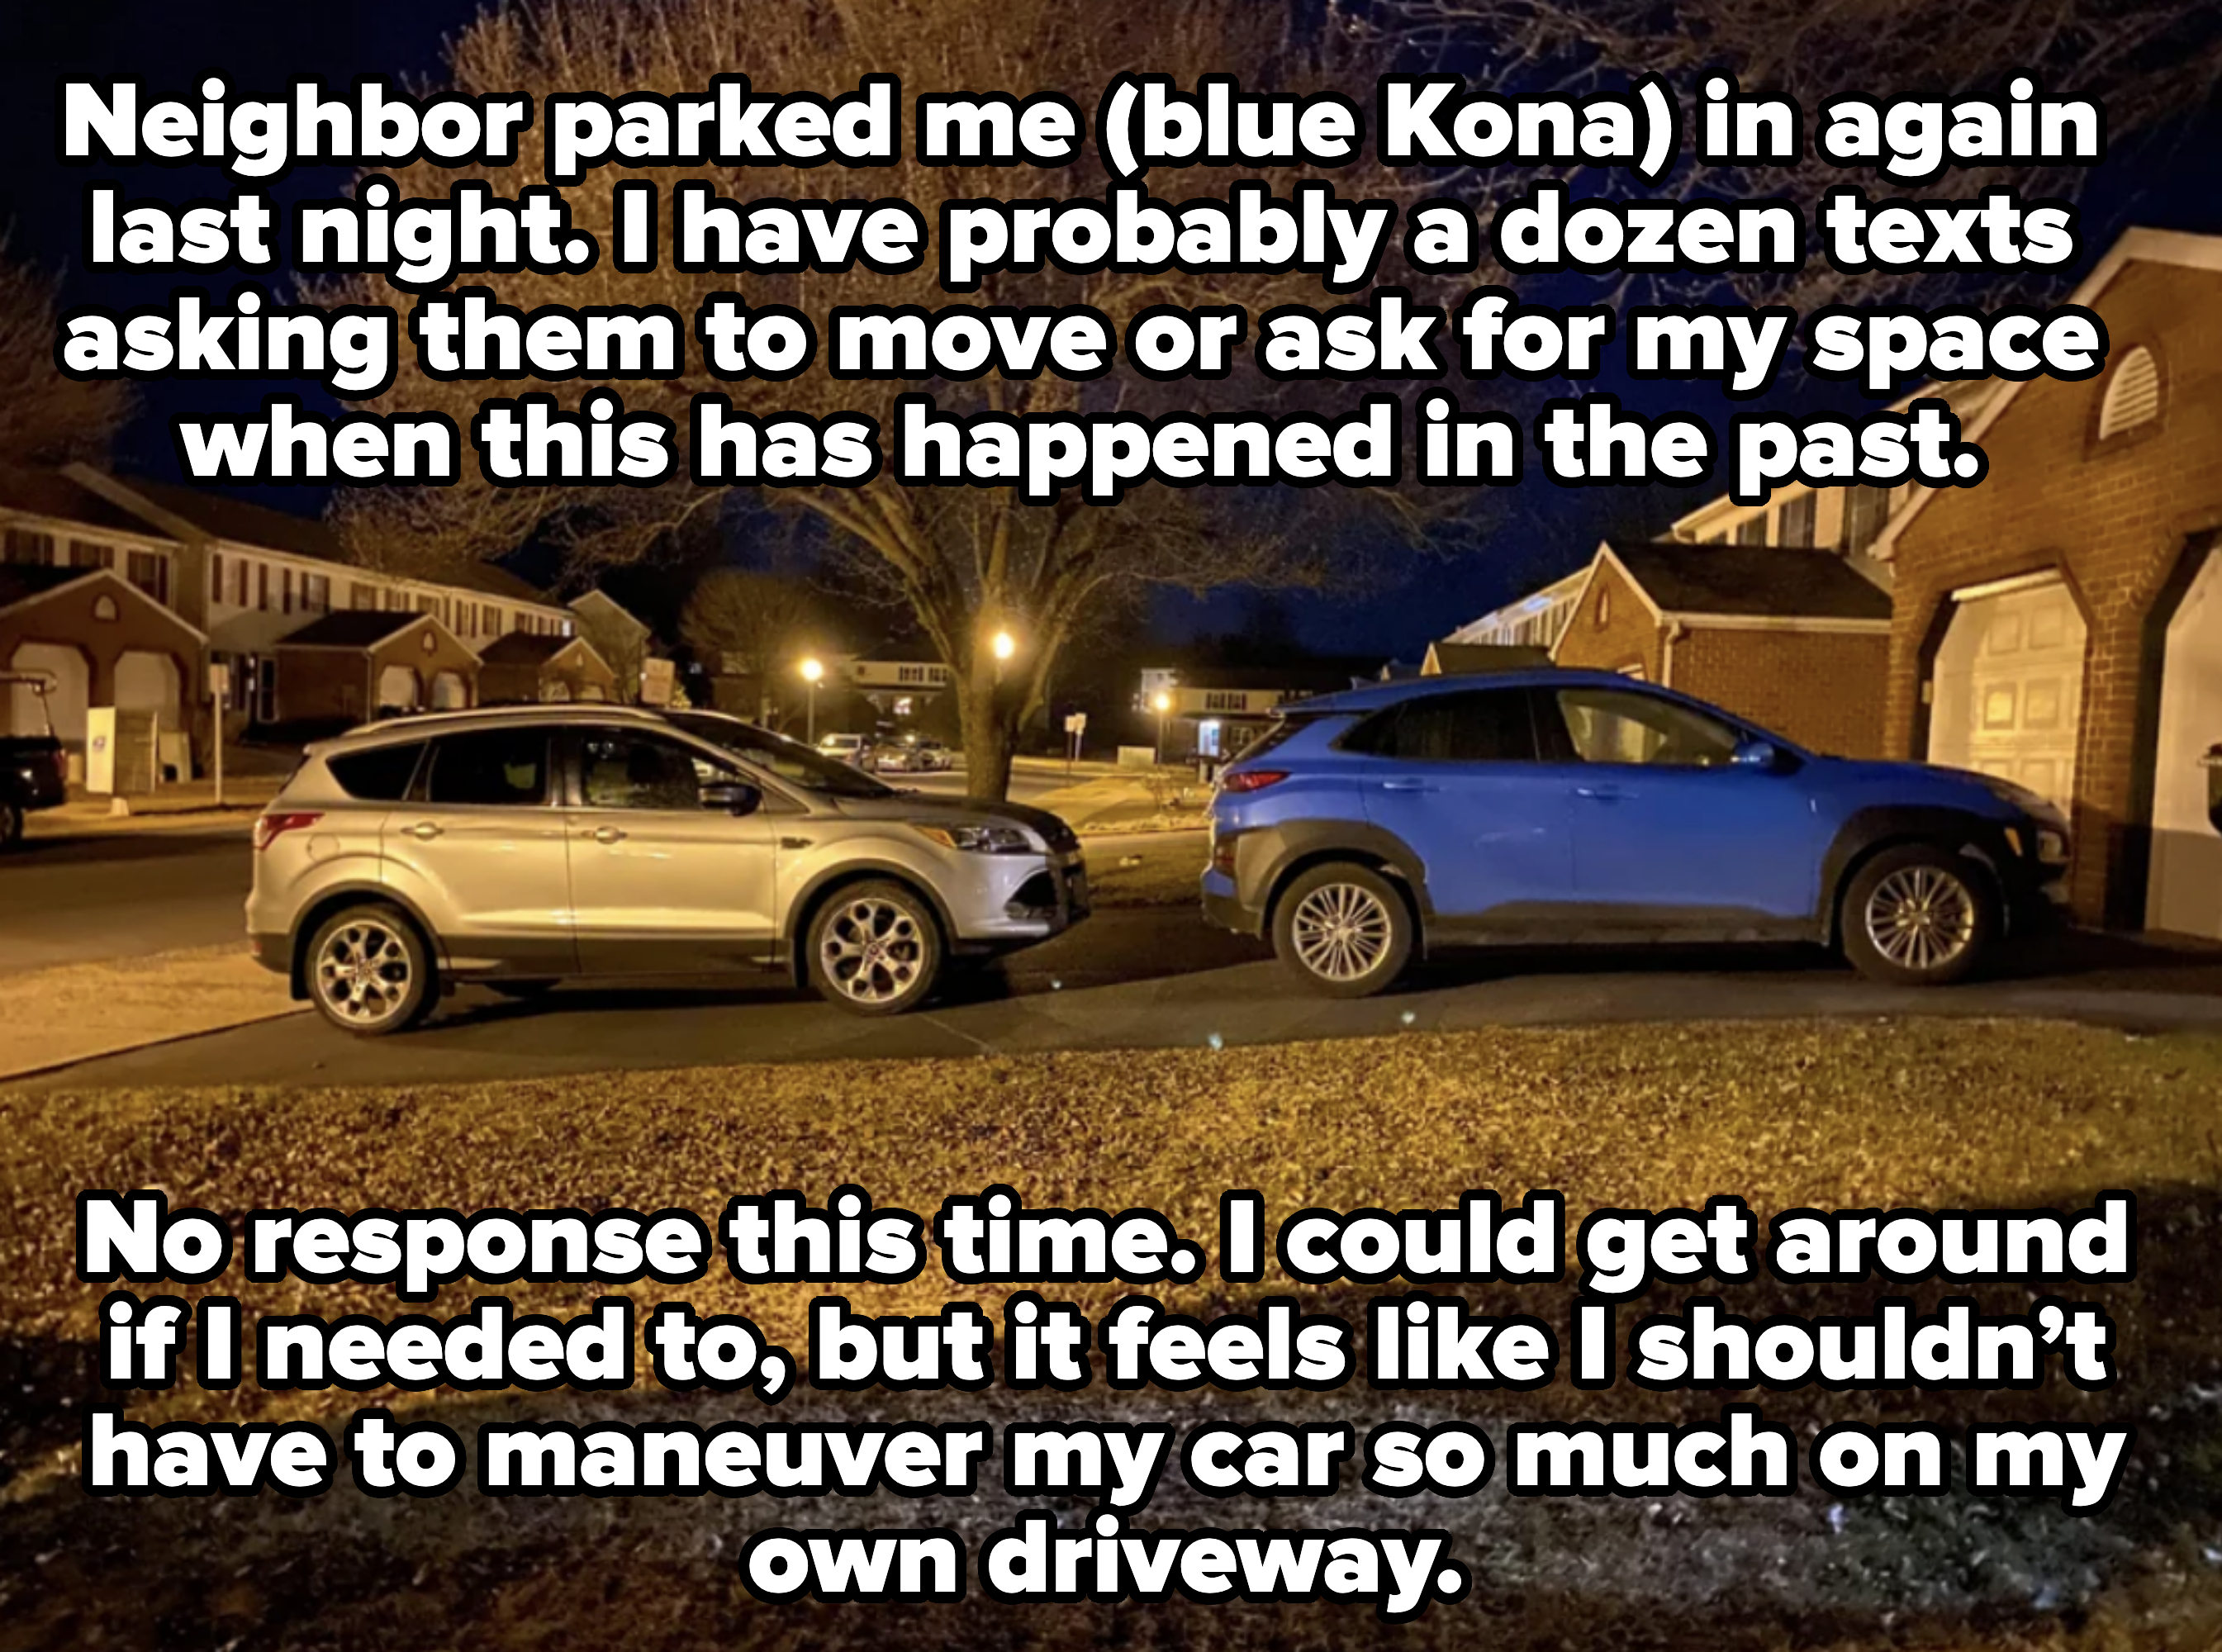 neighbor blocking another car in